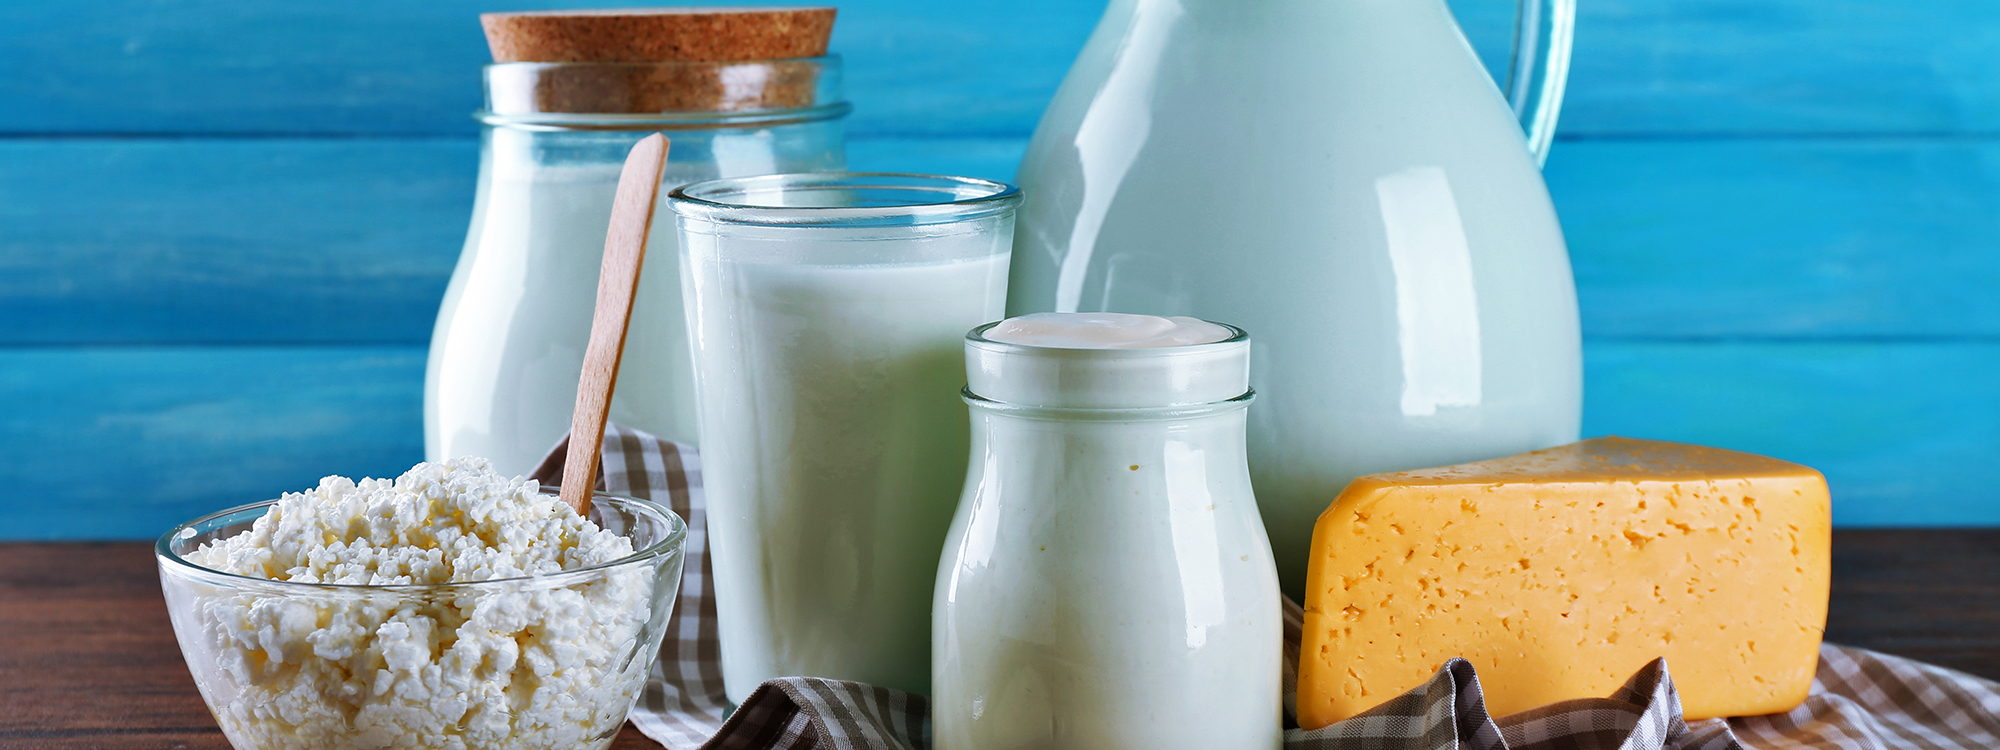 DASH Diet Foods: Can Whole Milk Play a Role? | U.S. Dairy